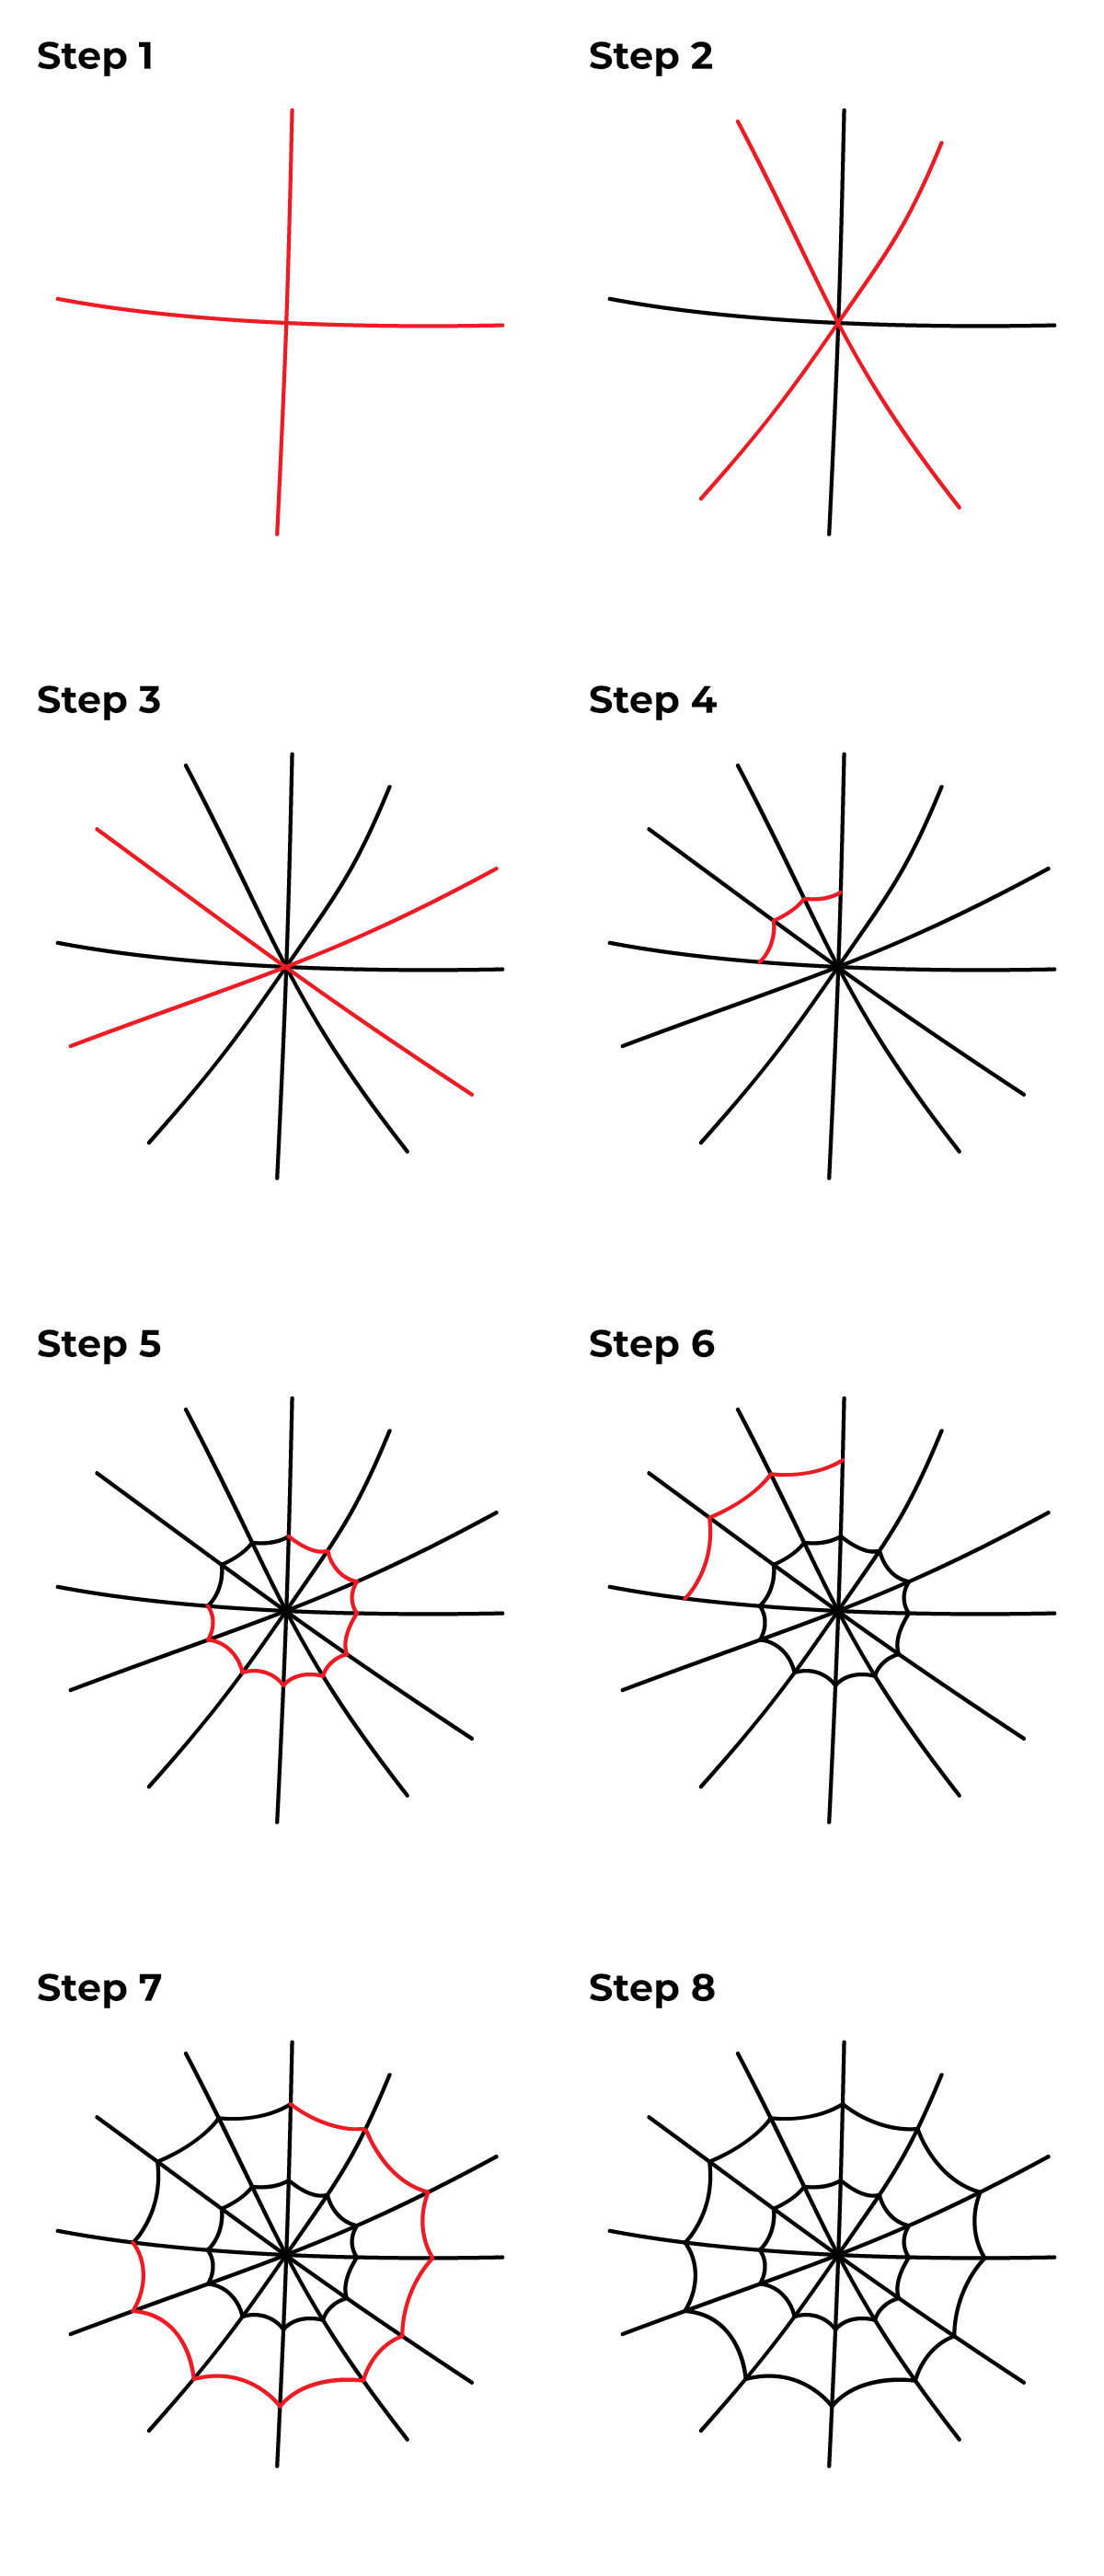 How To Draw a Spider Web Step by Step